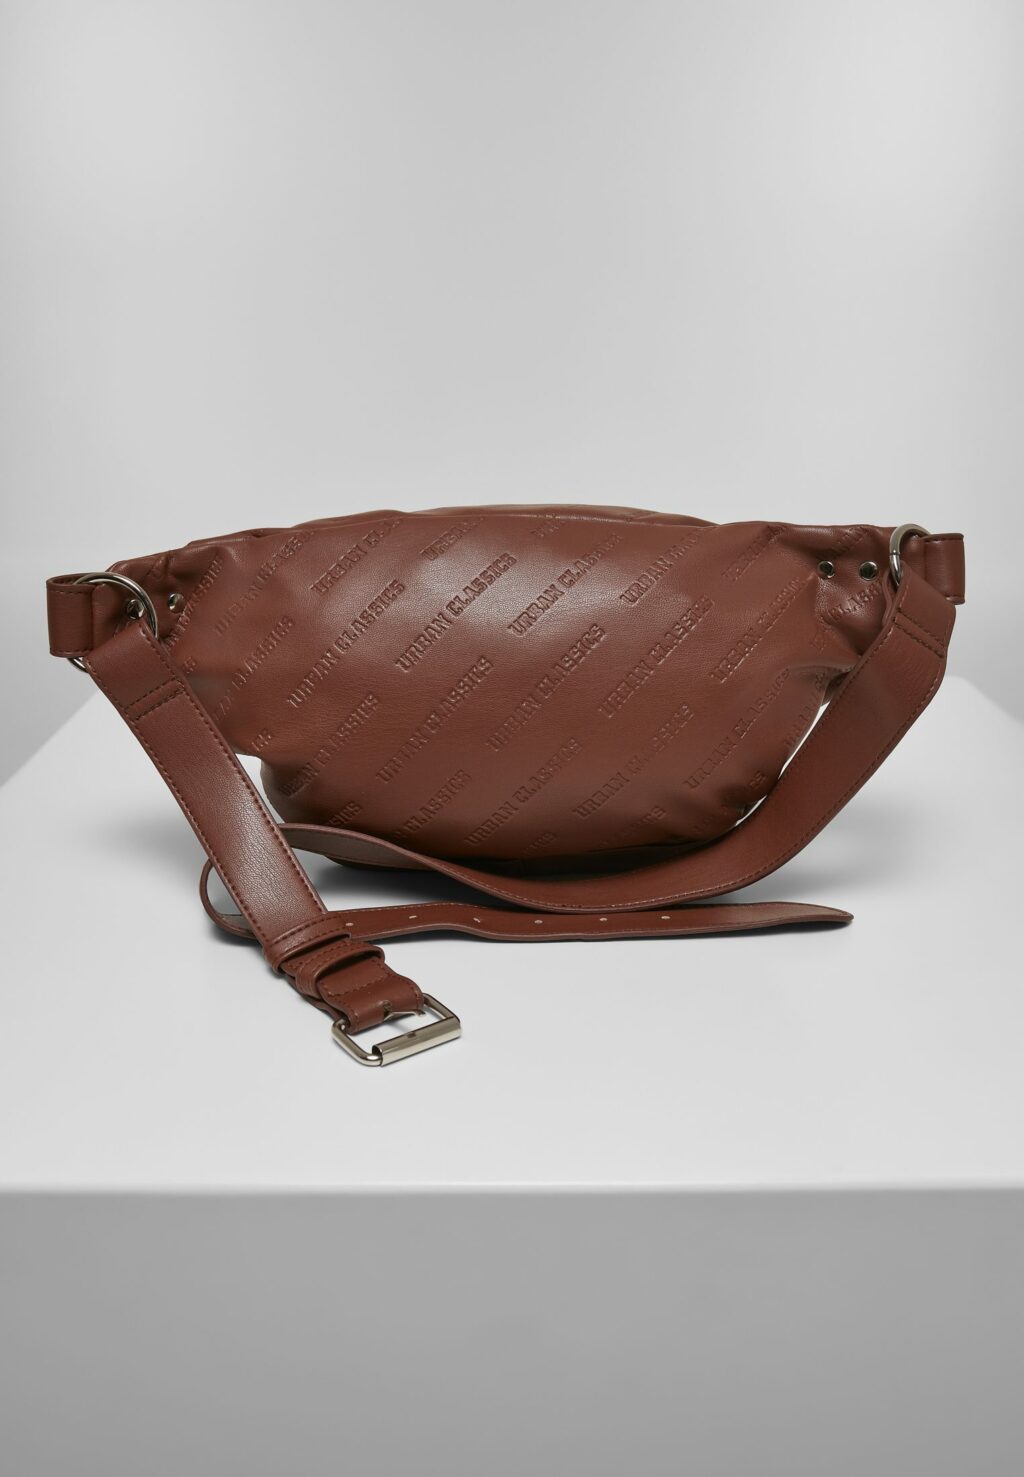 Synthetic Leather Shoulder Bag brown one TB2933